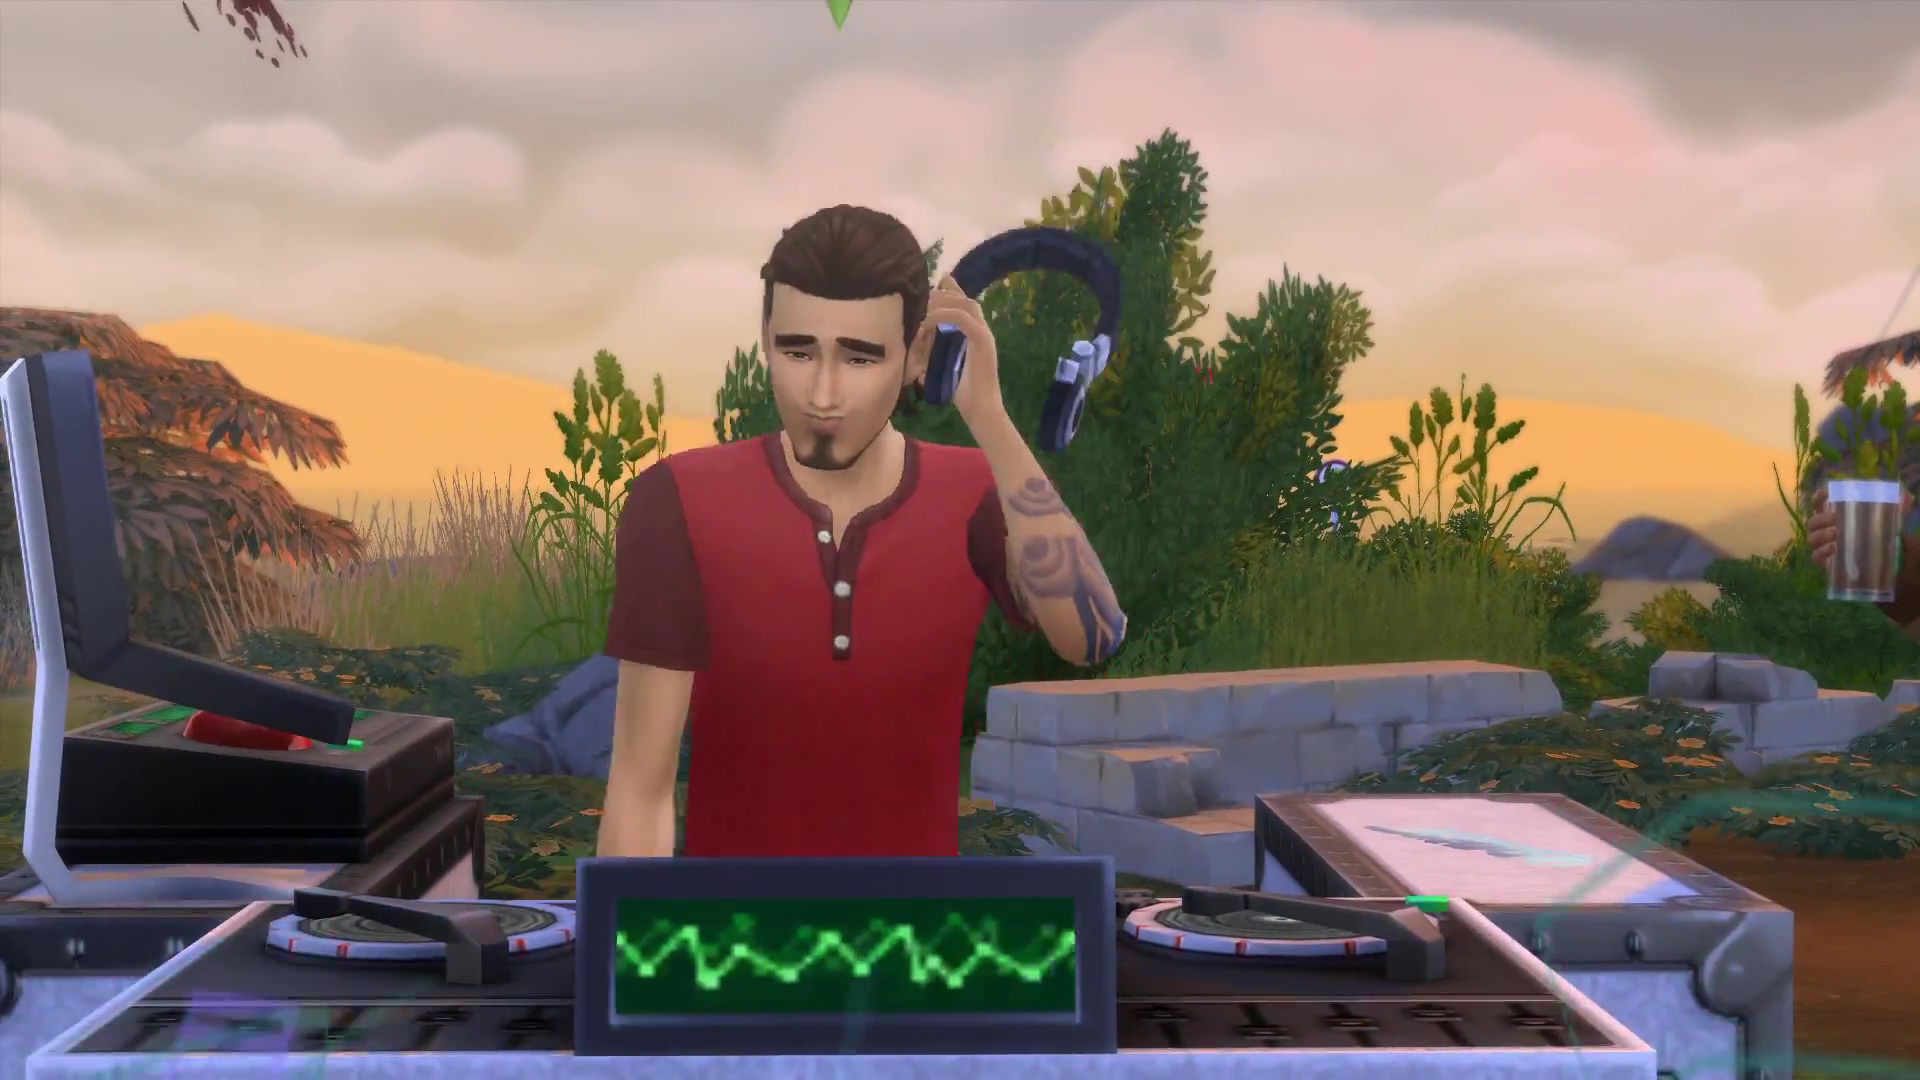 The Sims 4: Get Together: Dance Skill and DJ Booth Preview